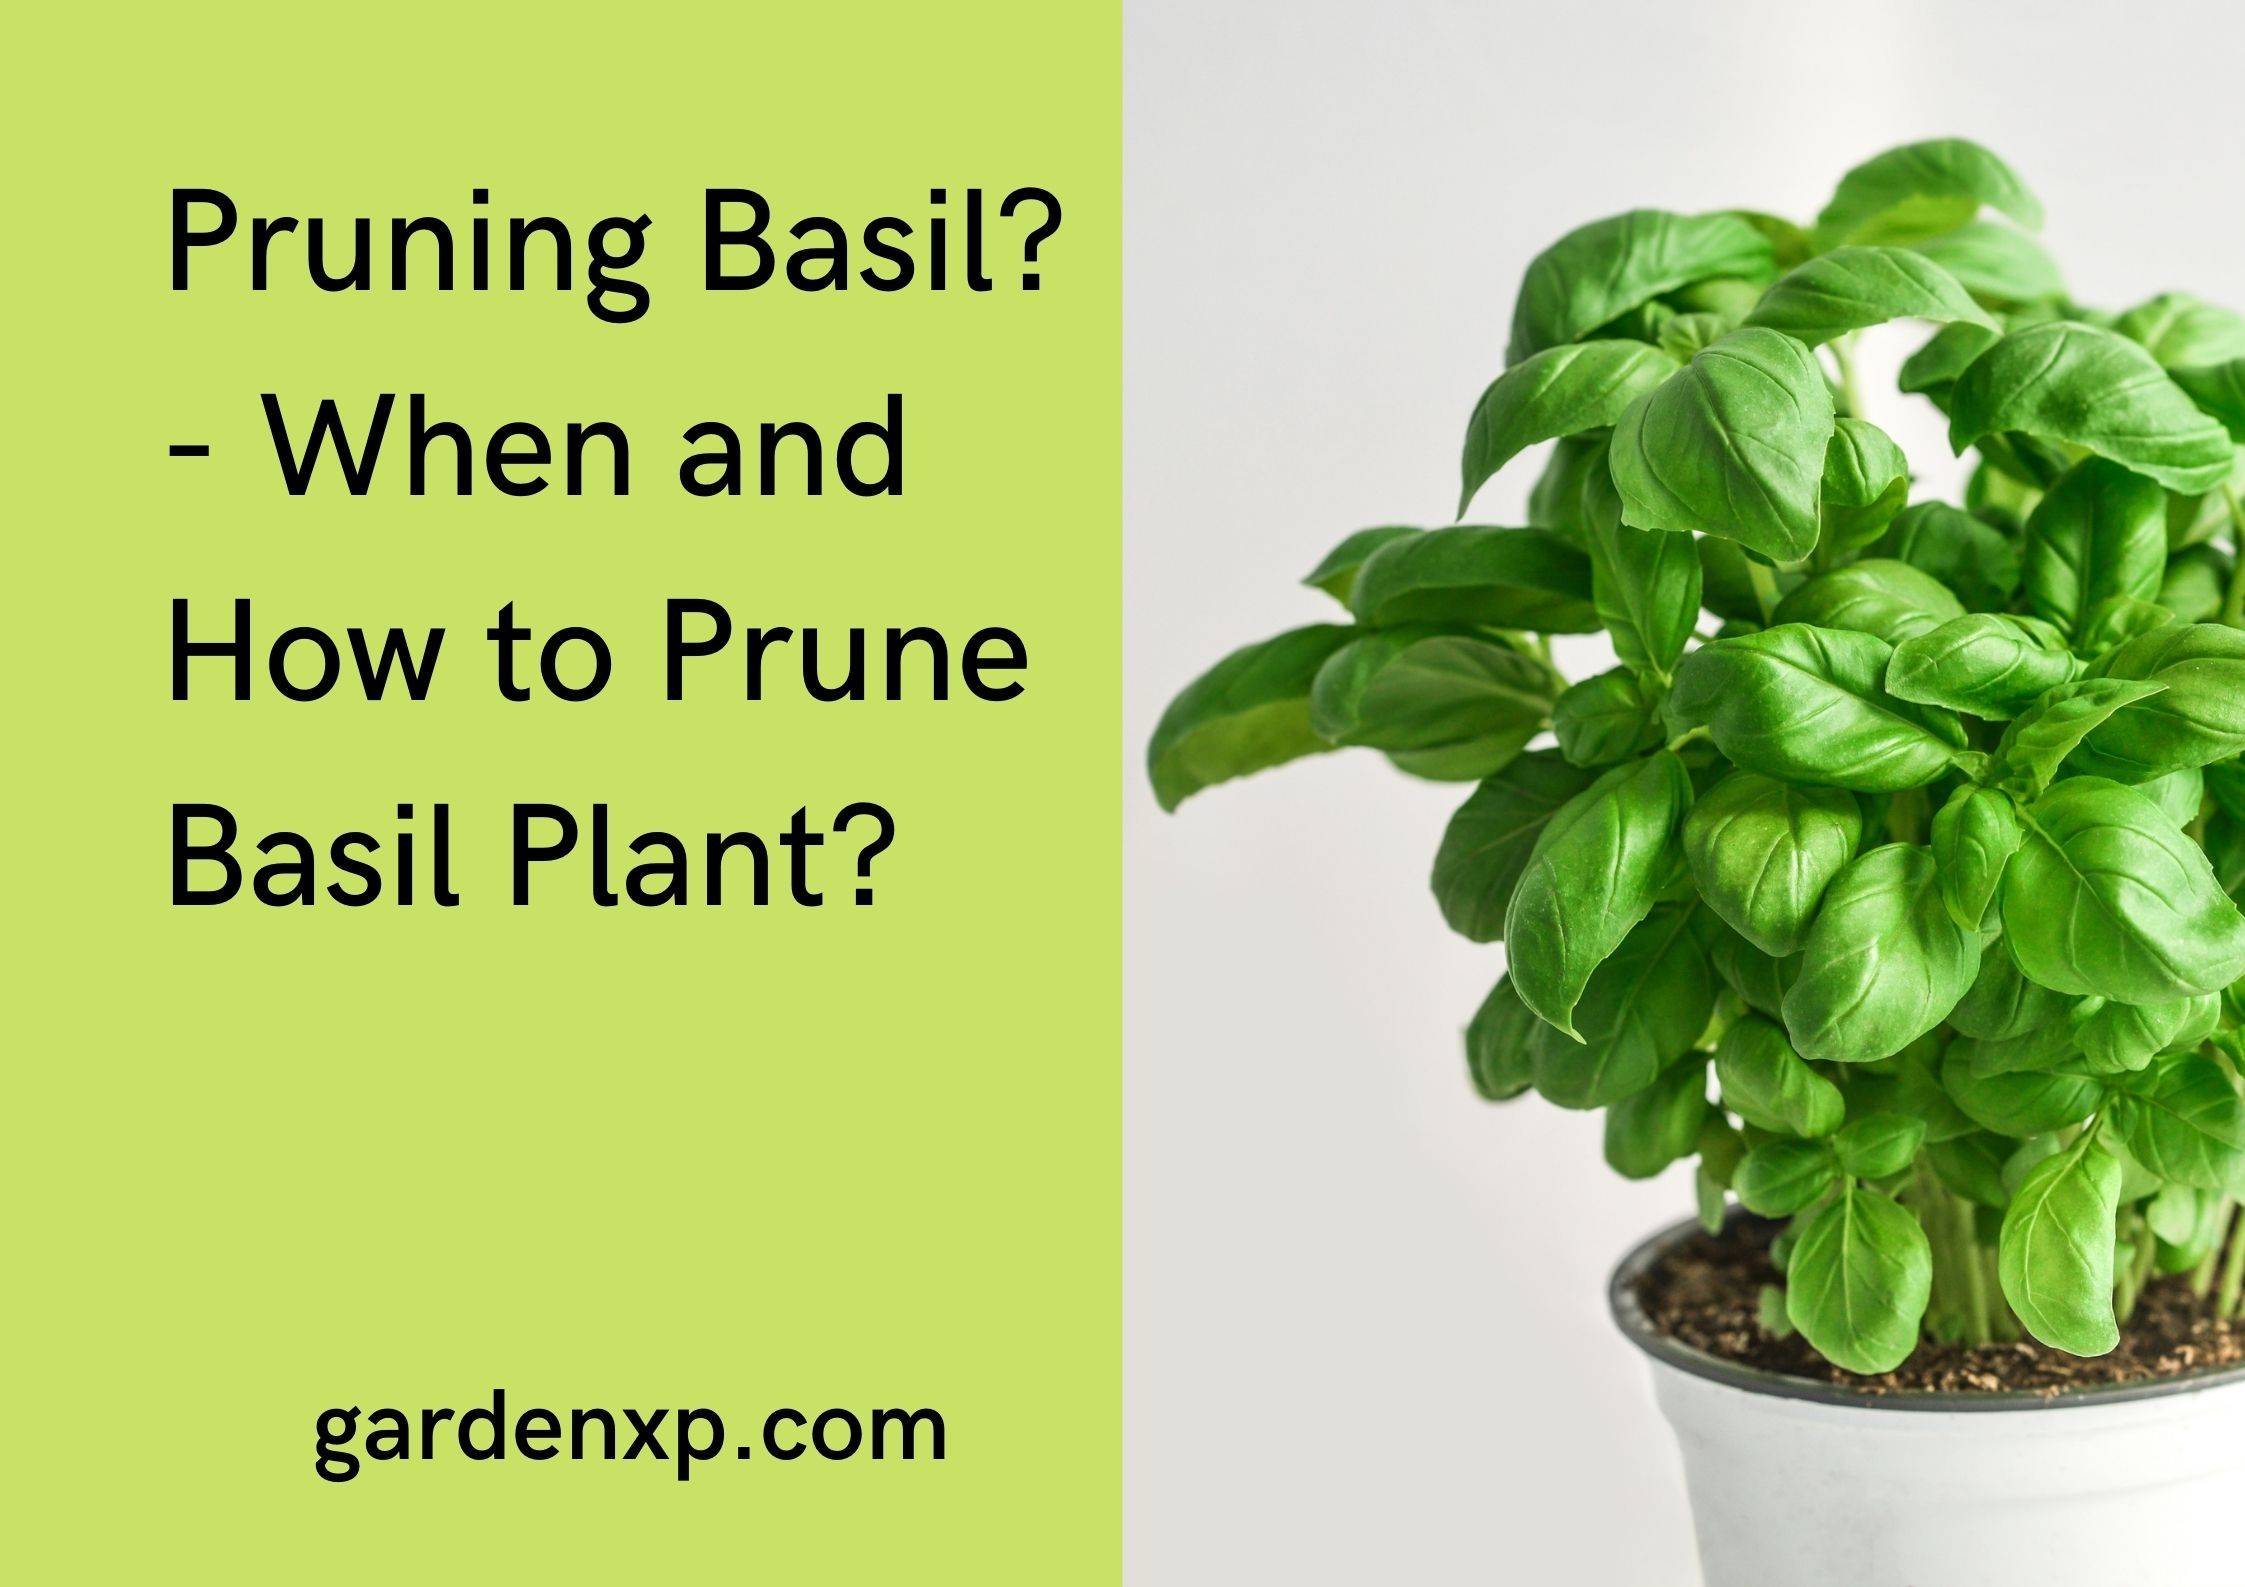 Pruning Basil - When and How to Prune Basil Plant?